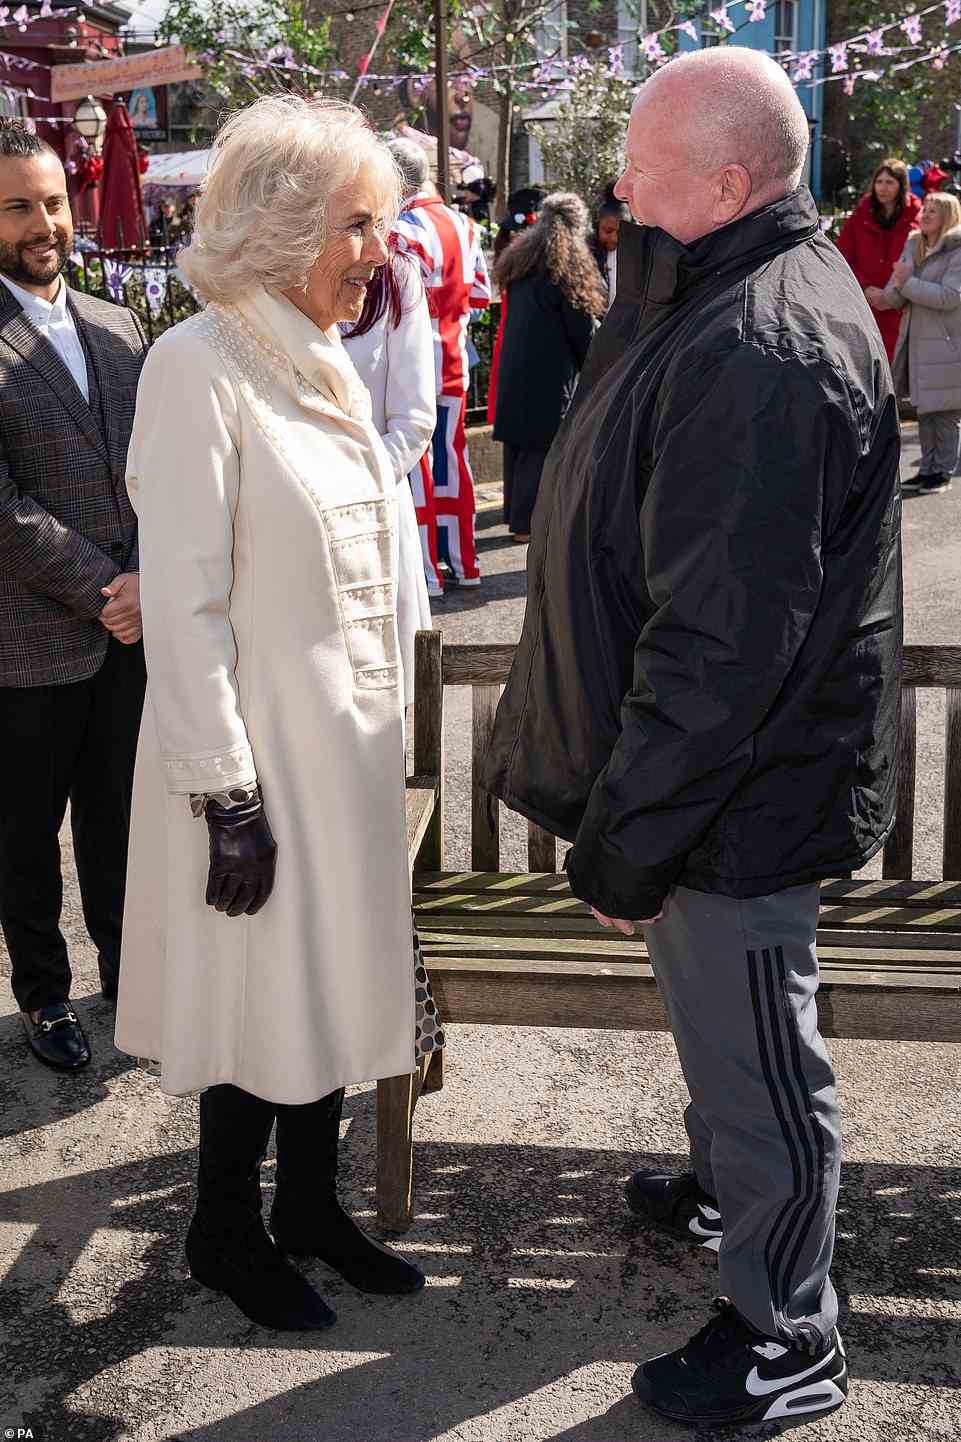 Steve McFadden was wearing a tracksuit for the visit. The Duchess of Cornwall opted for a cream coat by Anna Valentine